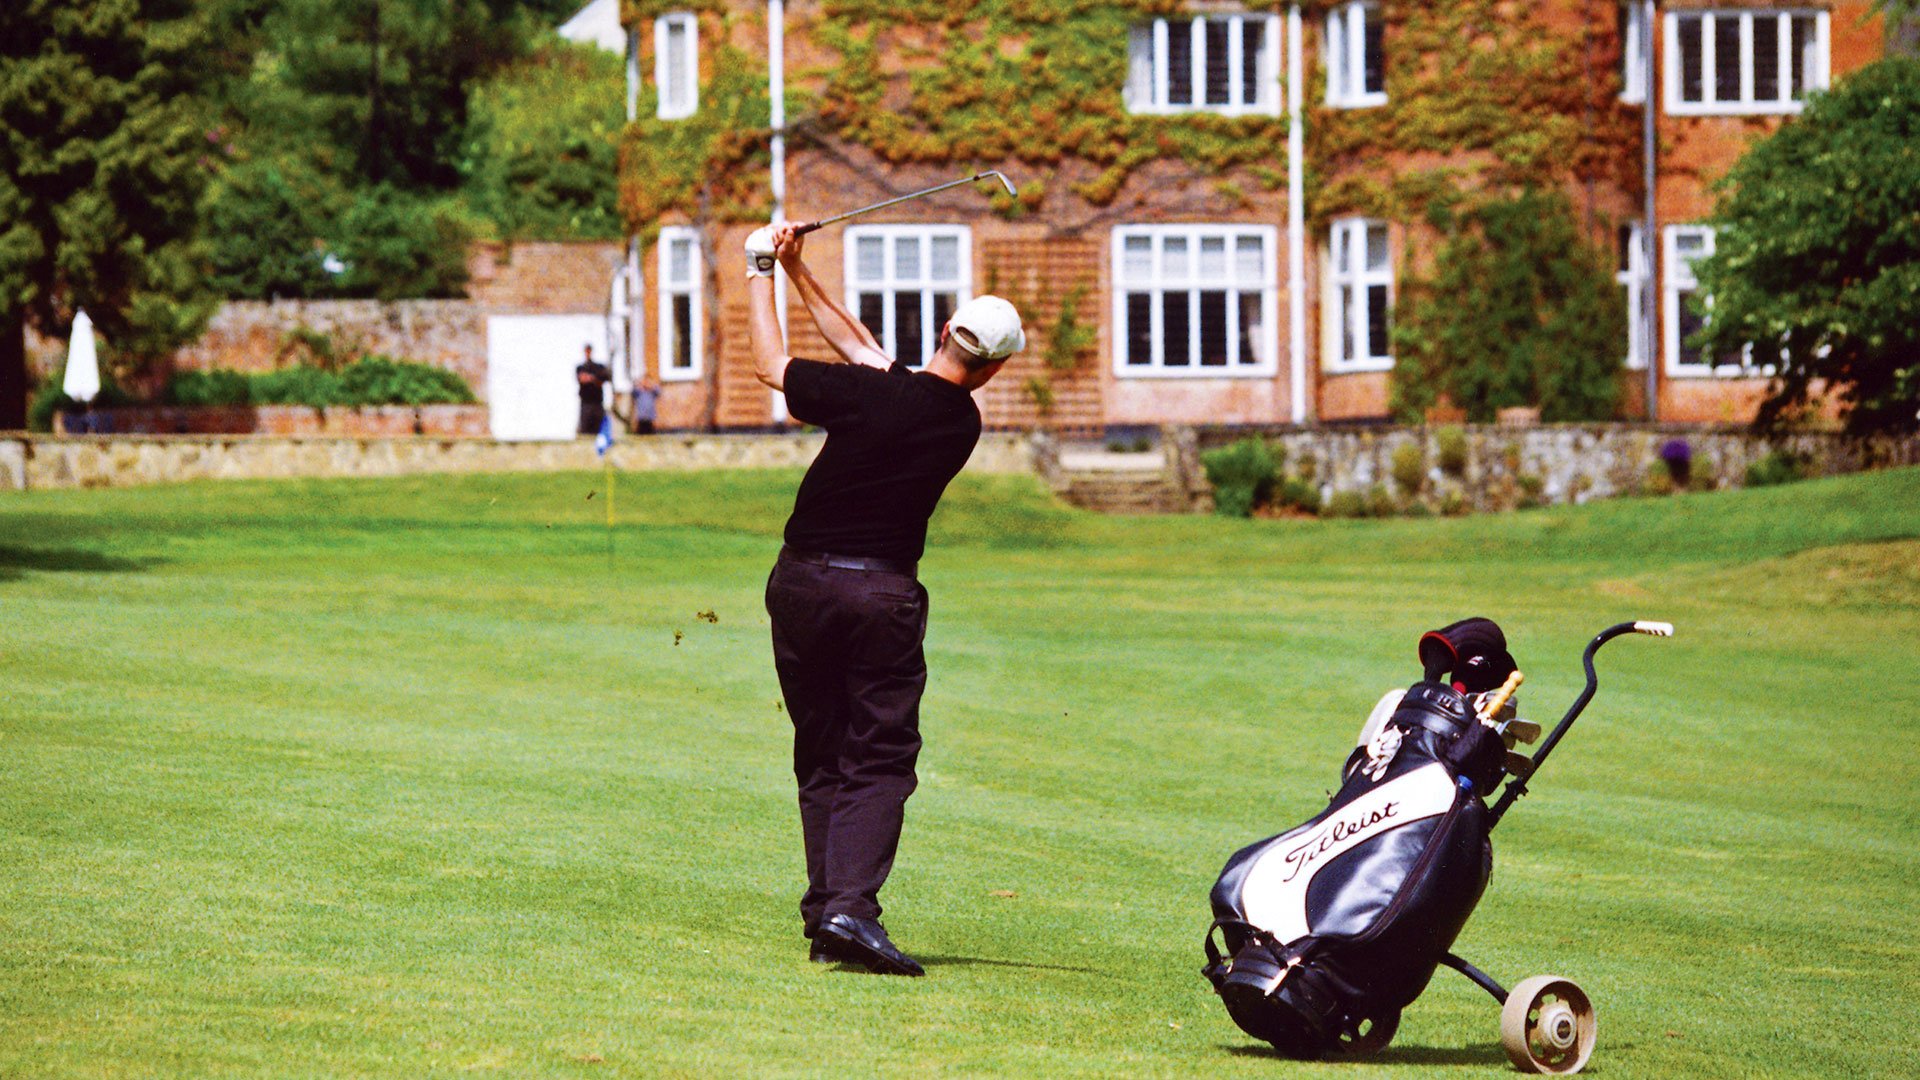 A golfer on the fairway close to the Grade II listed club house - Donnington Valley Hotel, Golf & Spa, Newbury